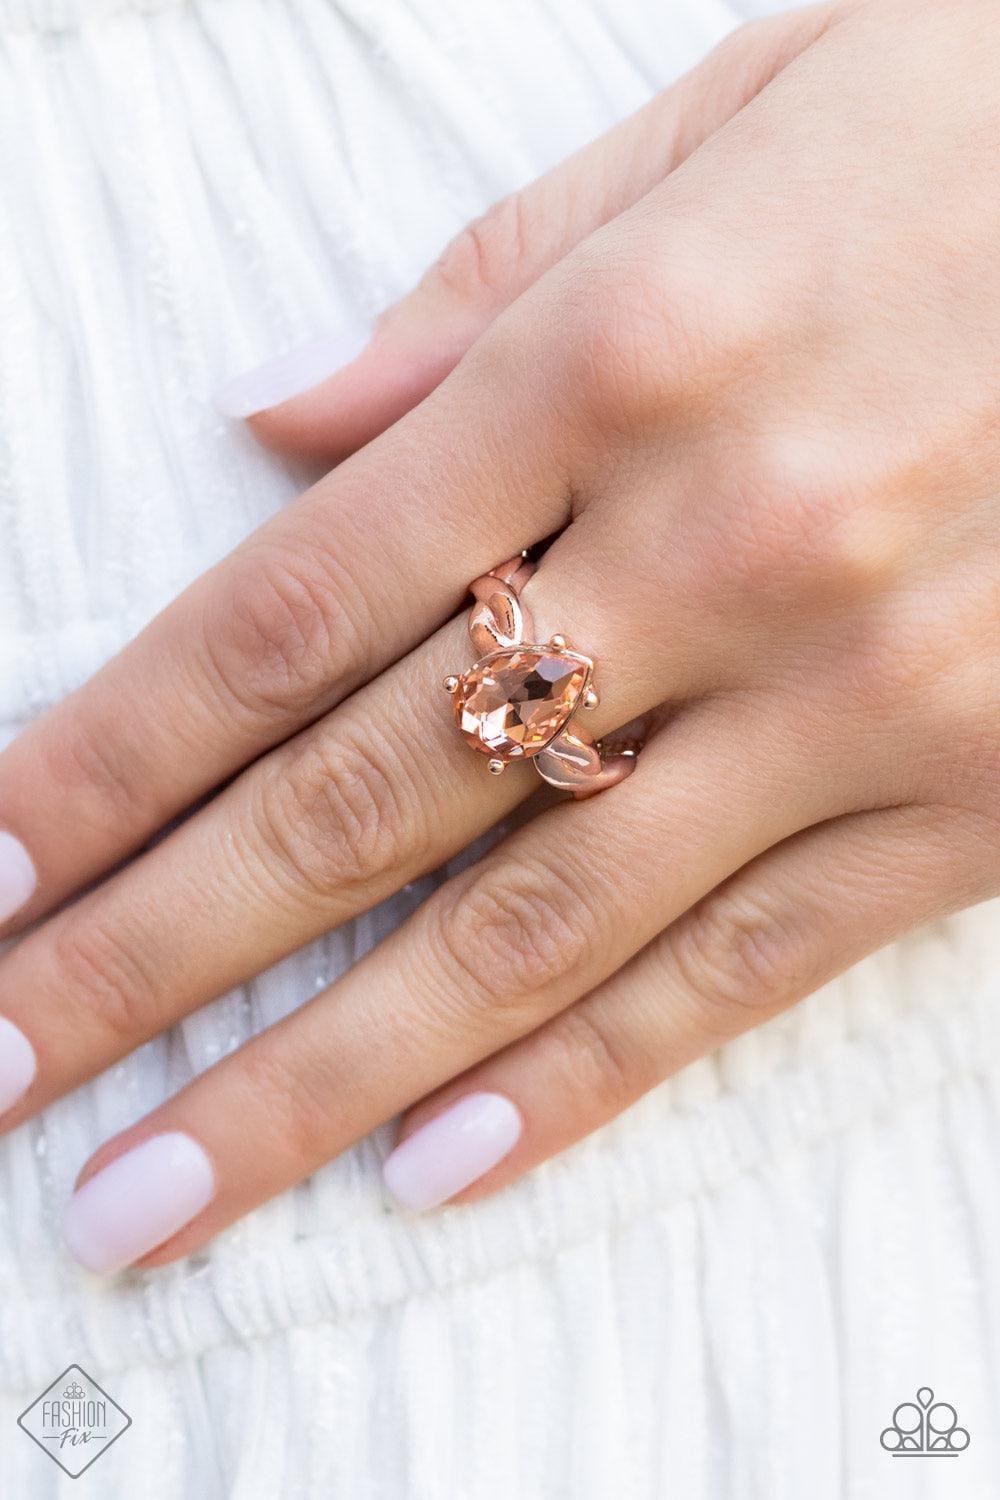 Paparazzi Accessories - Law Of Attraction - Rose Gold Ring - Bling by JessieK